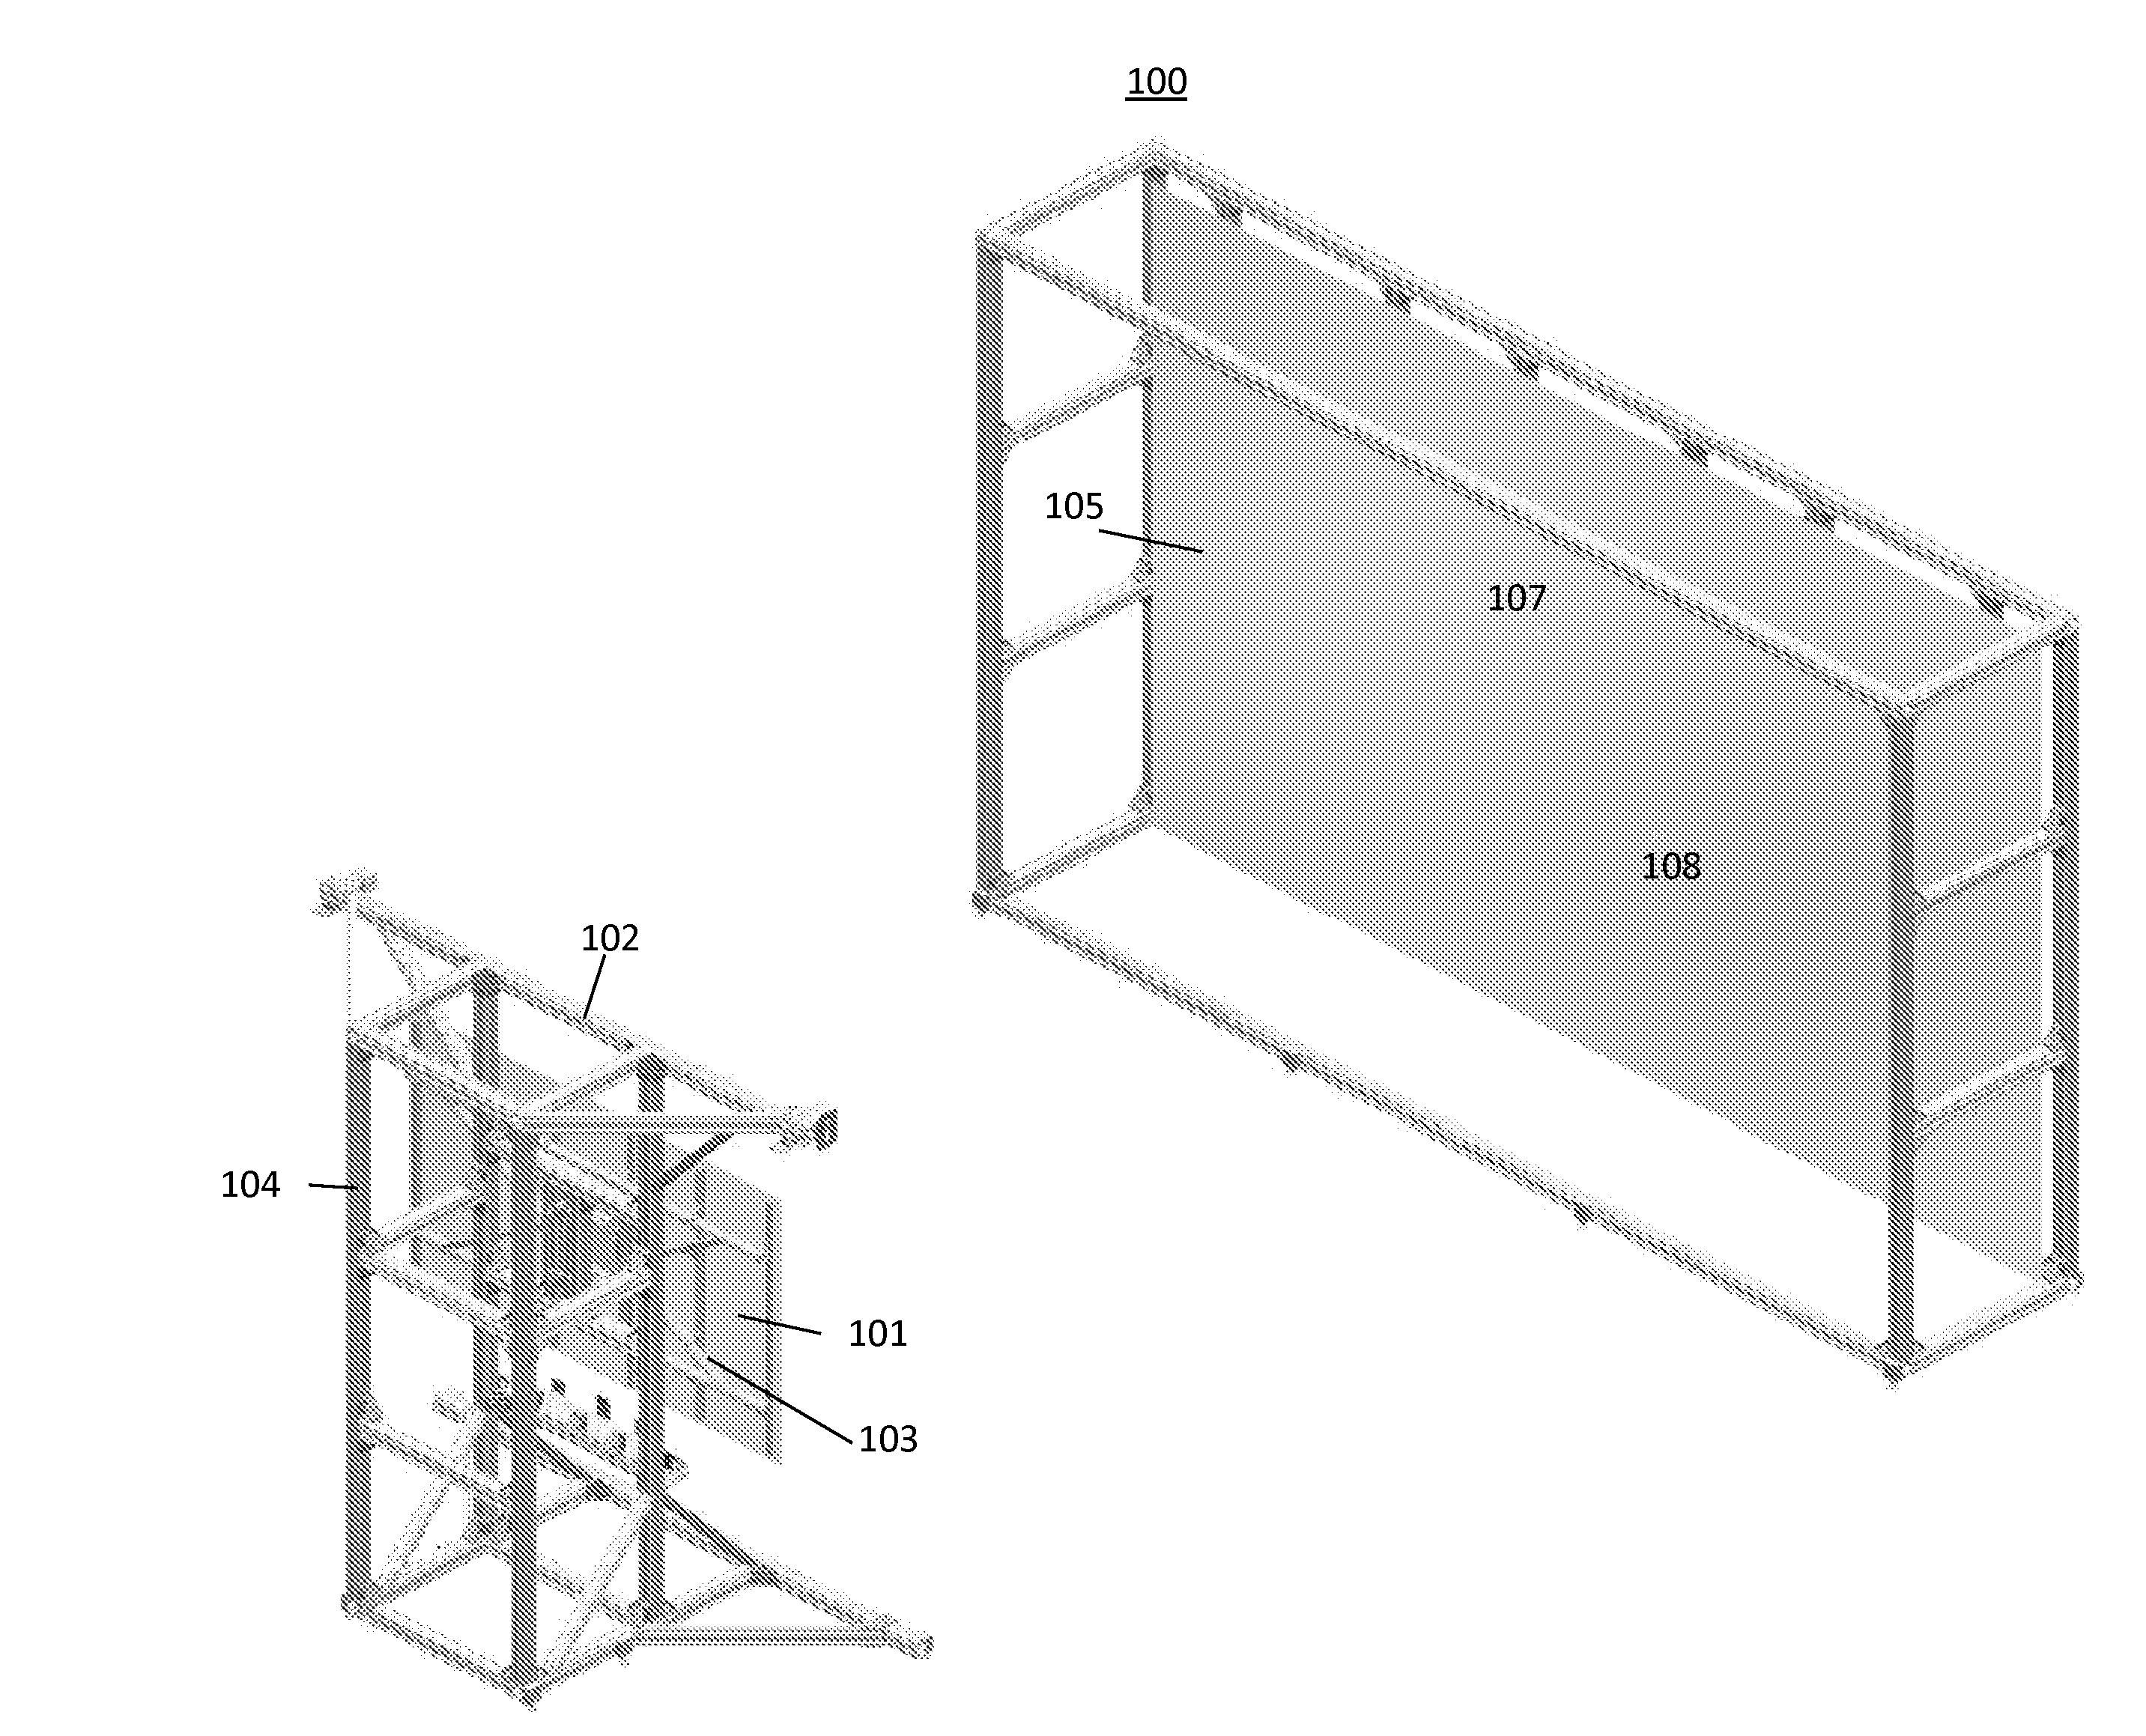 Automated deflectometry system for assessing reflector quality